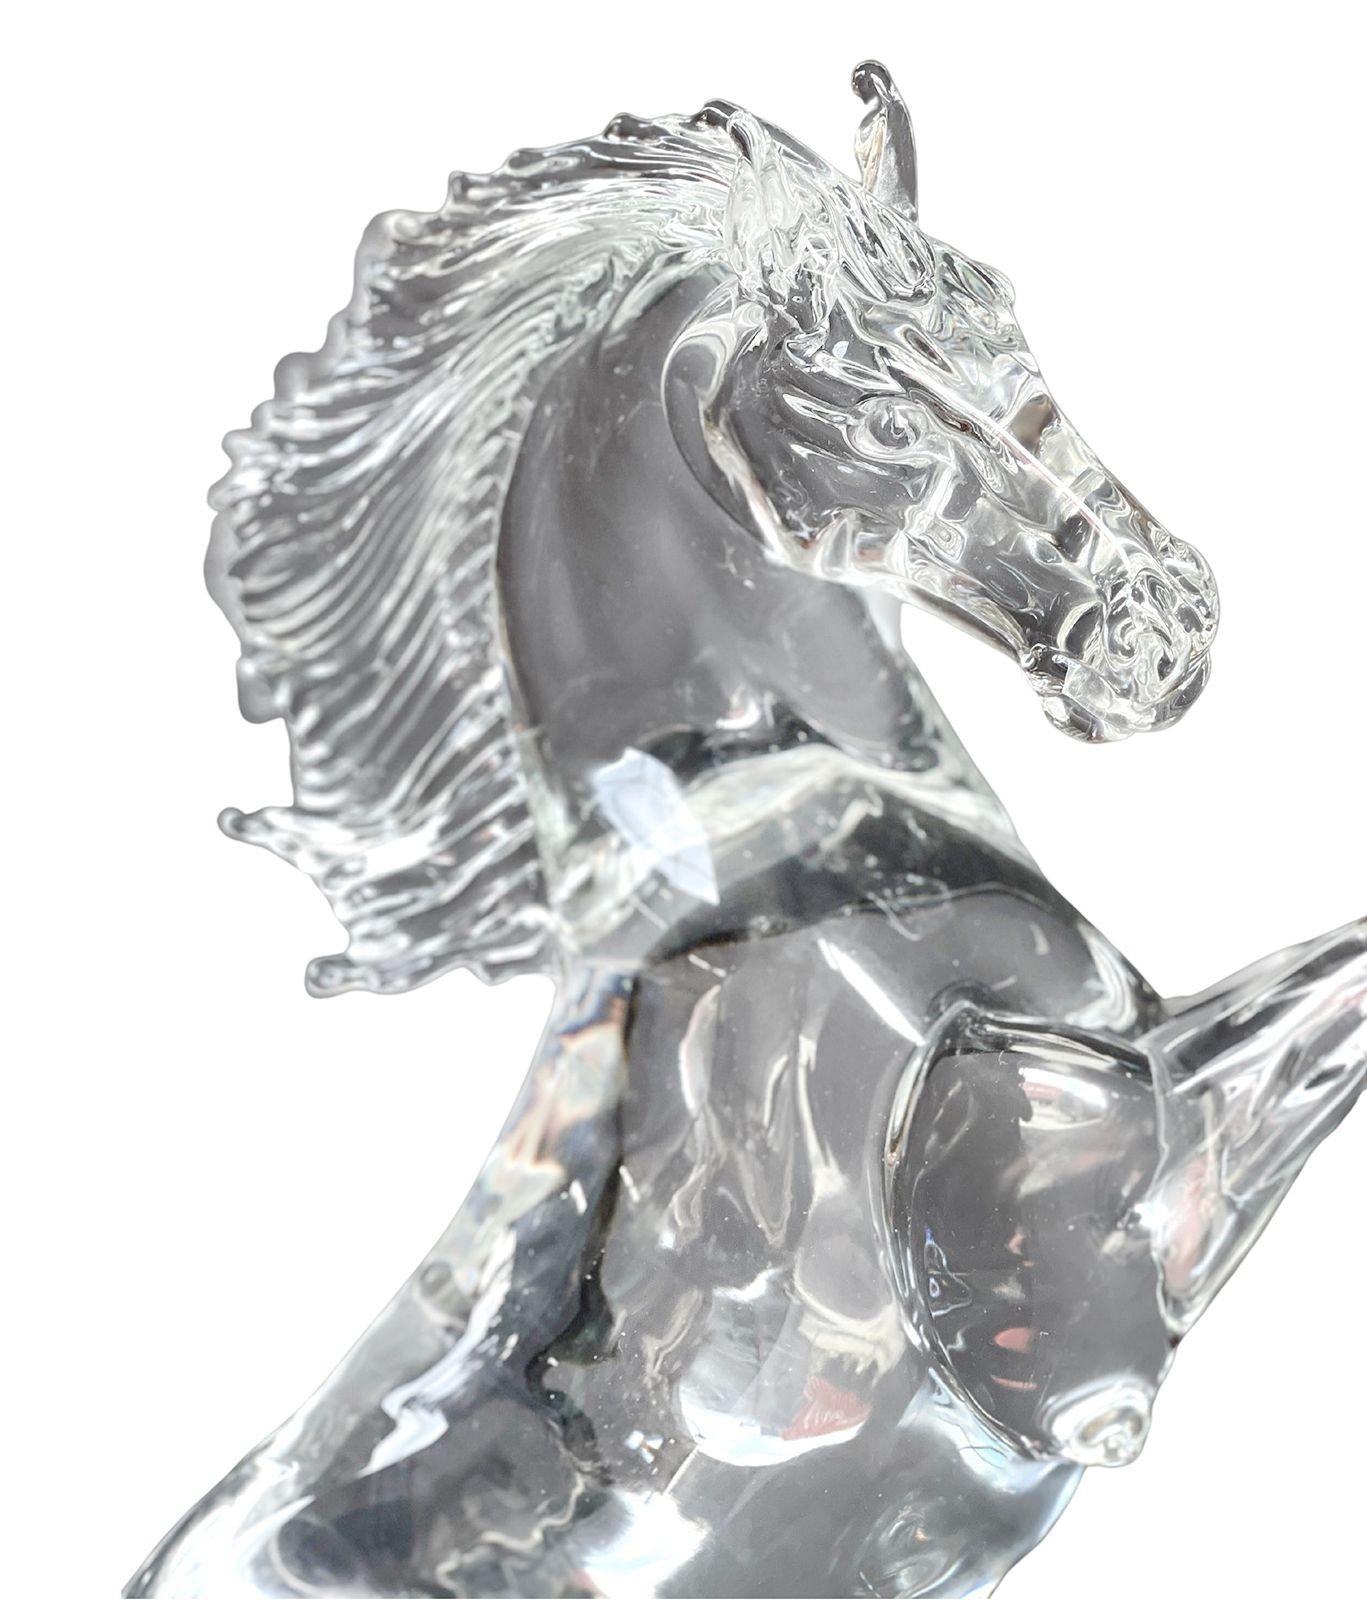 Clear Murano glass sculpture depicting a rearing horse by Arnaldo Zanella (signed). 
Dimensions:
23.5